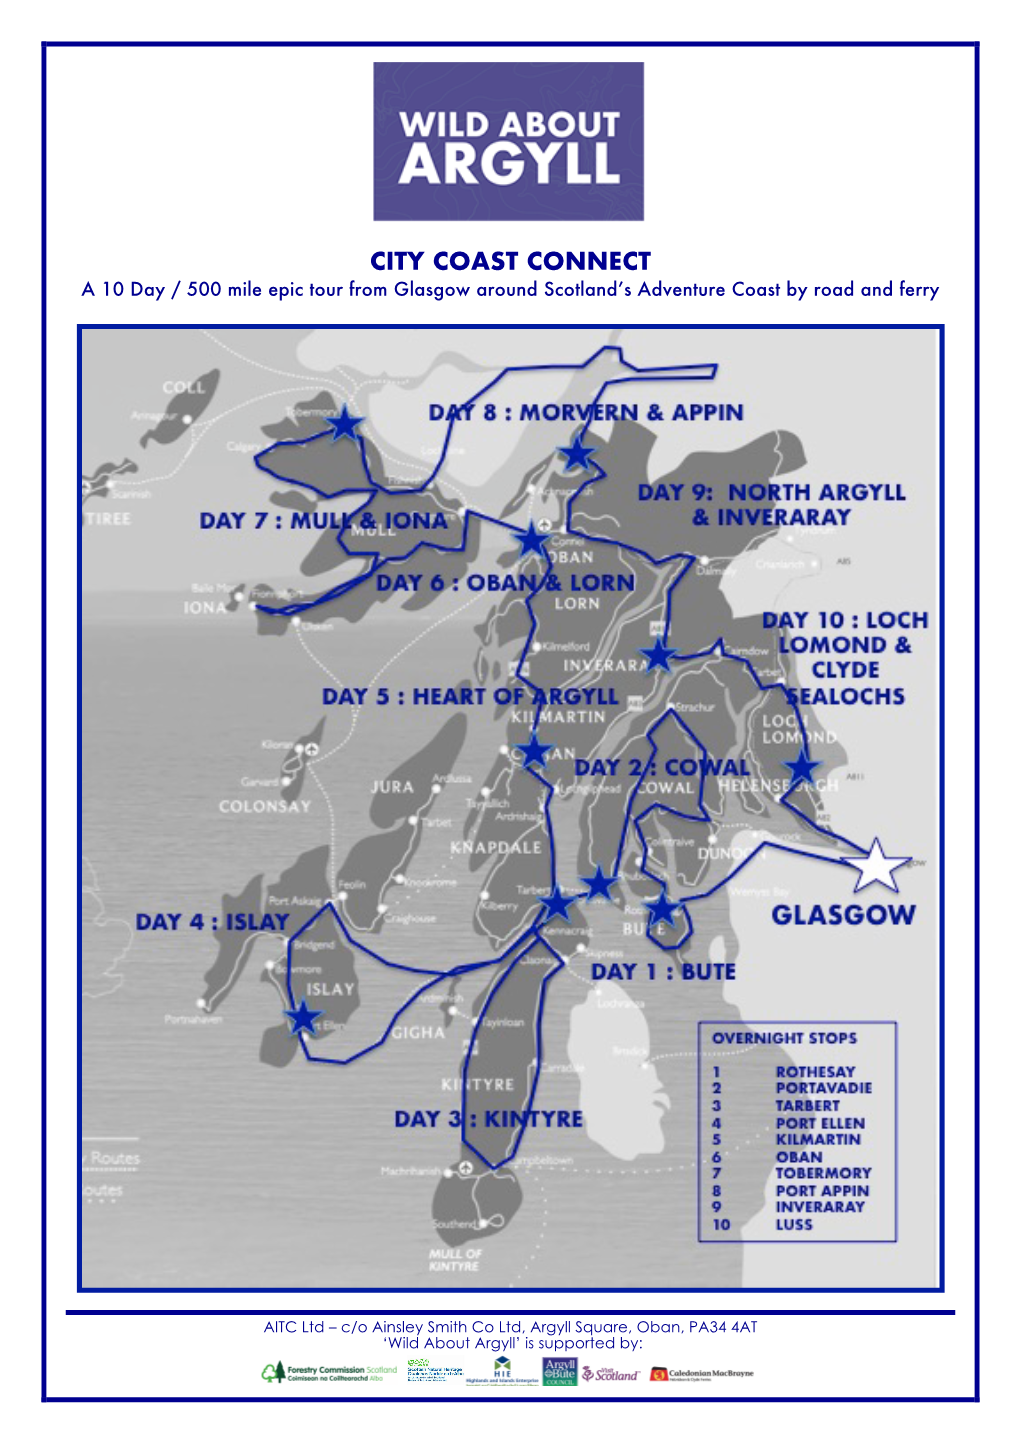 CITY COAST CONNECT a 10 Day / 500 Mile Epic Tour from Glasgow Around Scotland’S Adventure Coast by Road and Ferry